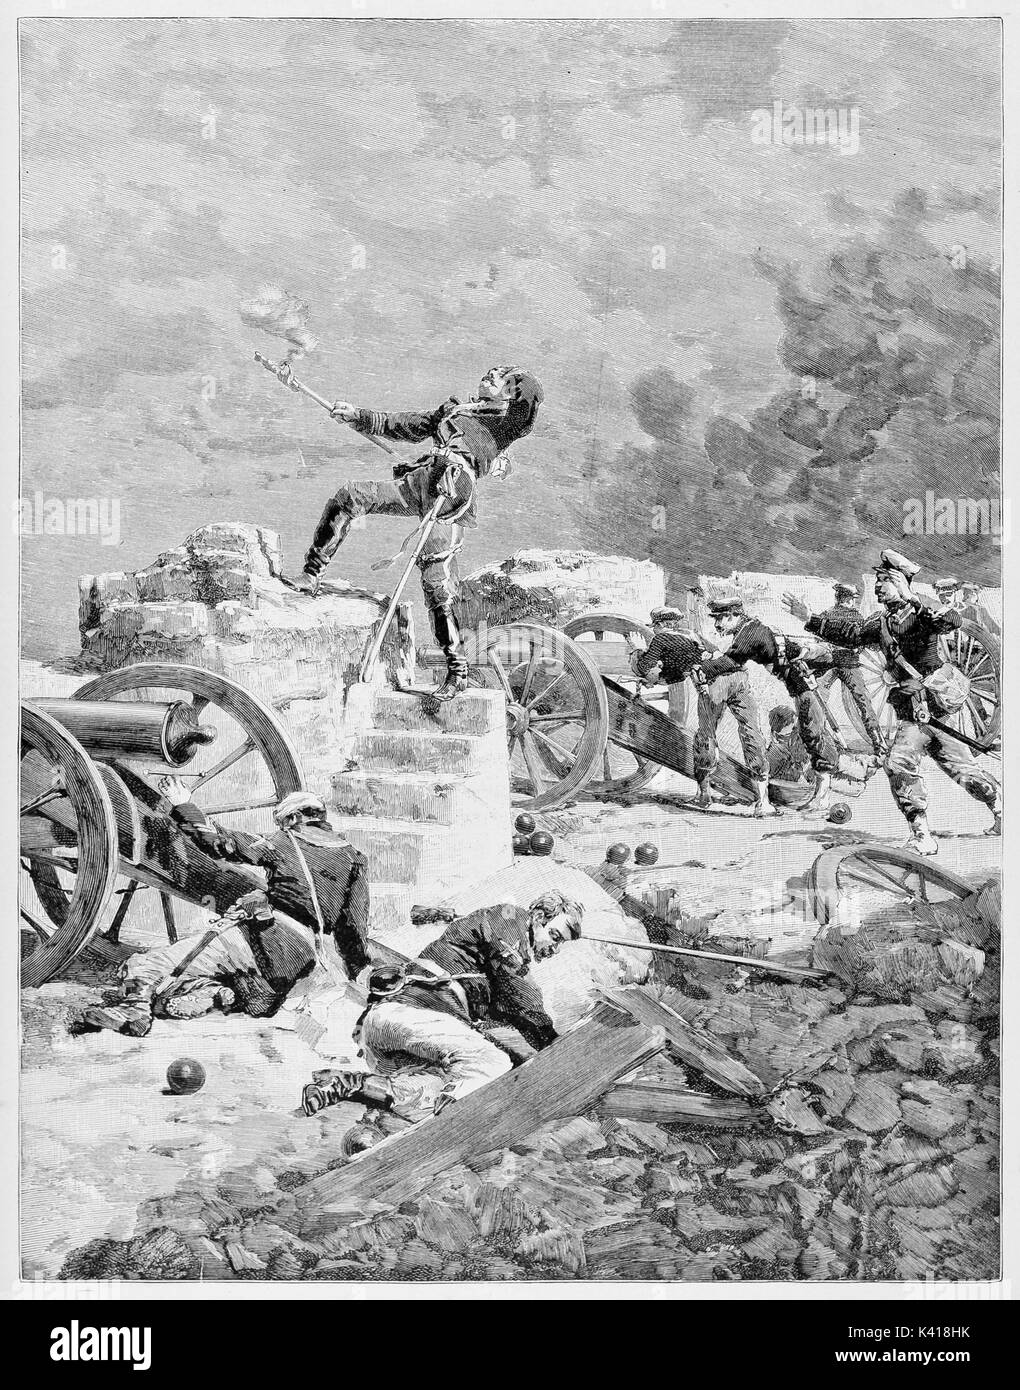 Ancient battle scene with a soldier mortally shooted while uses a cannon in trench. Italian patriot Cesare Rosaroll (1809 - 1849). By E. Matania published on Garibaldi e i Suoi Tempi Milan Italy 1884 Stock Photo